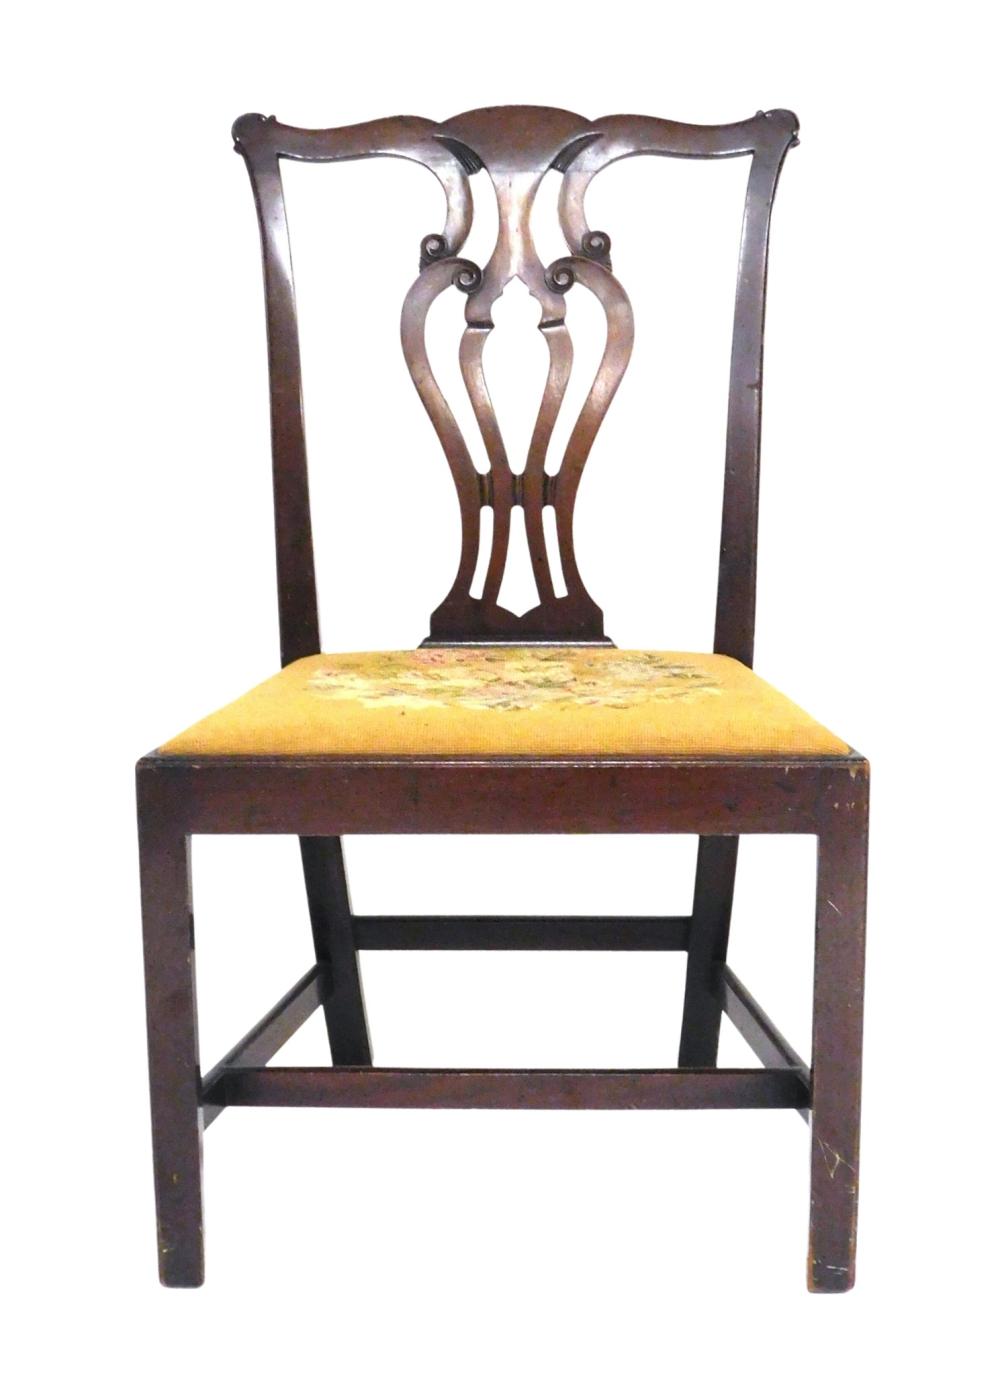 CHIPPENDALE STYLE SIDE CHAIR 20TH 2e2ca4